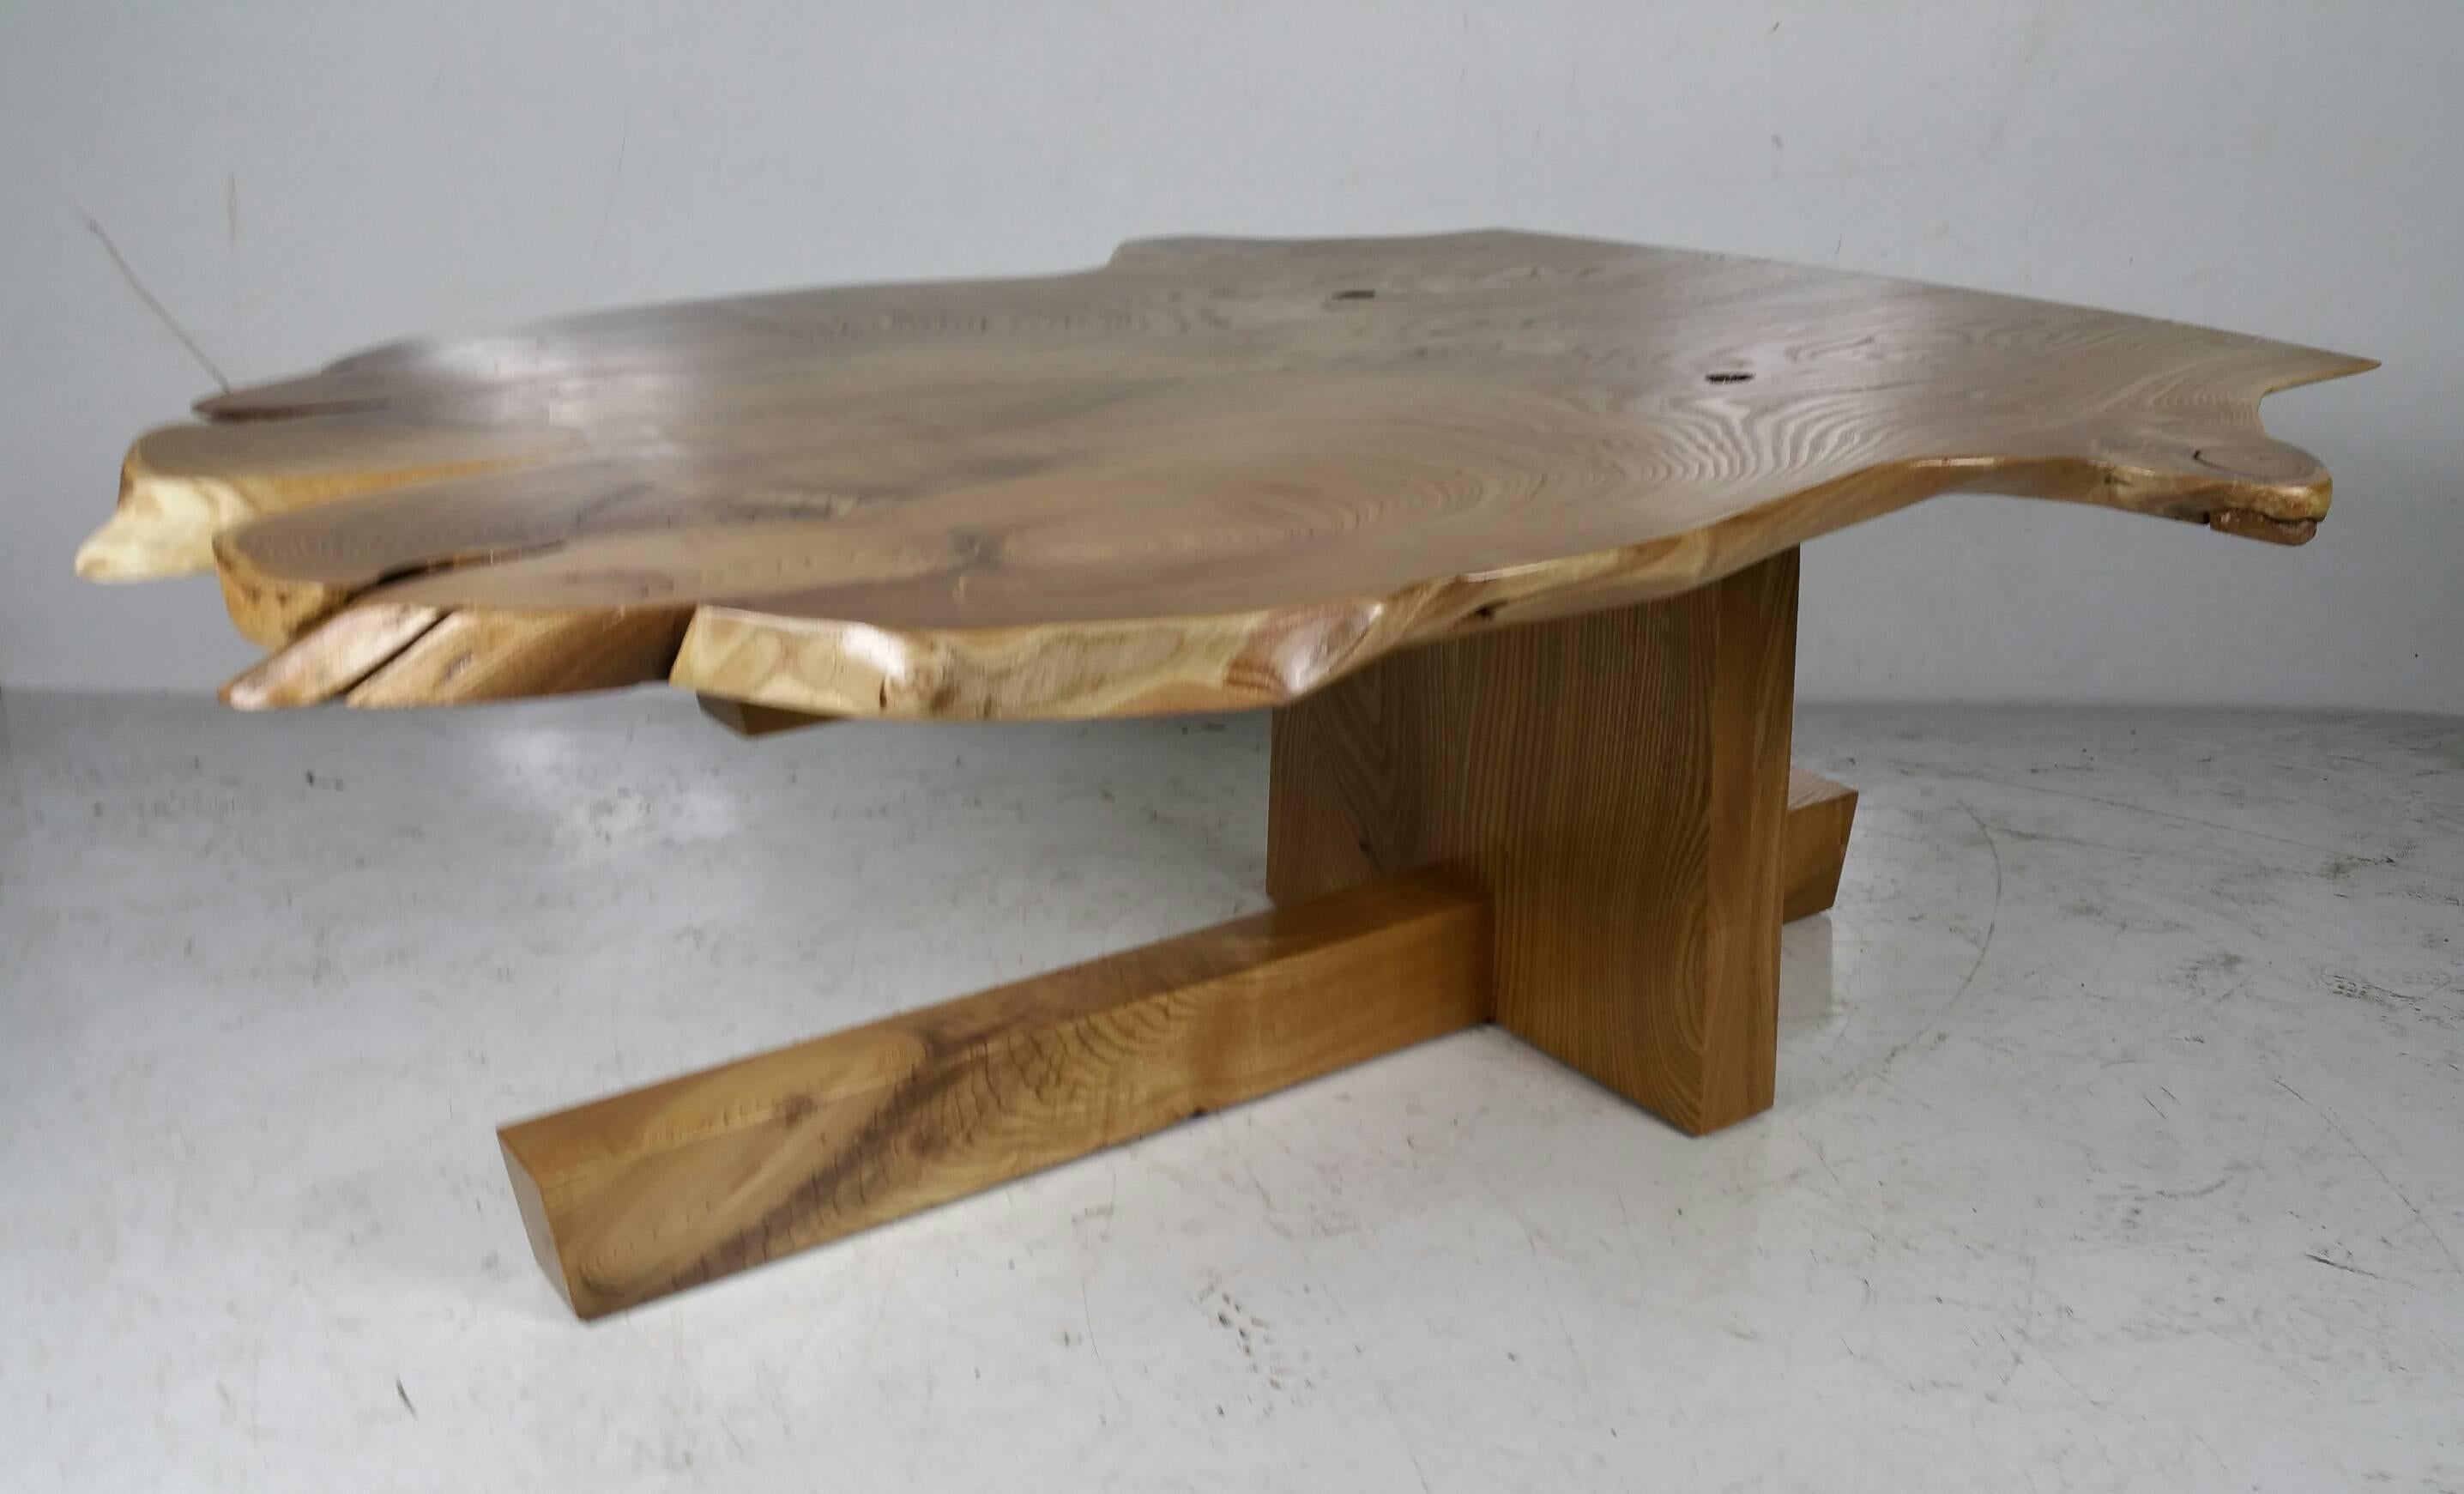 Figured catalpa wood modernist coffee table, Griff Logan exhibits:
2013 Arts Council For Wyoming County, Perry, NY, “Local Color”
2007–present Ashwood Artisans, East Aurora, NY

Education:
1987-88 Graphic Careers Design School, Rochester, NY,